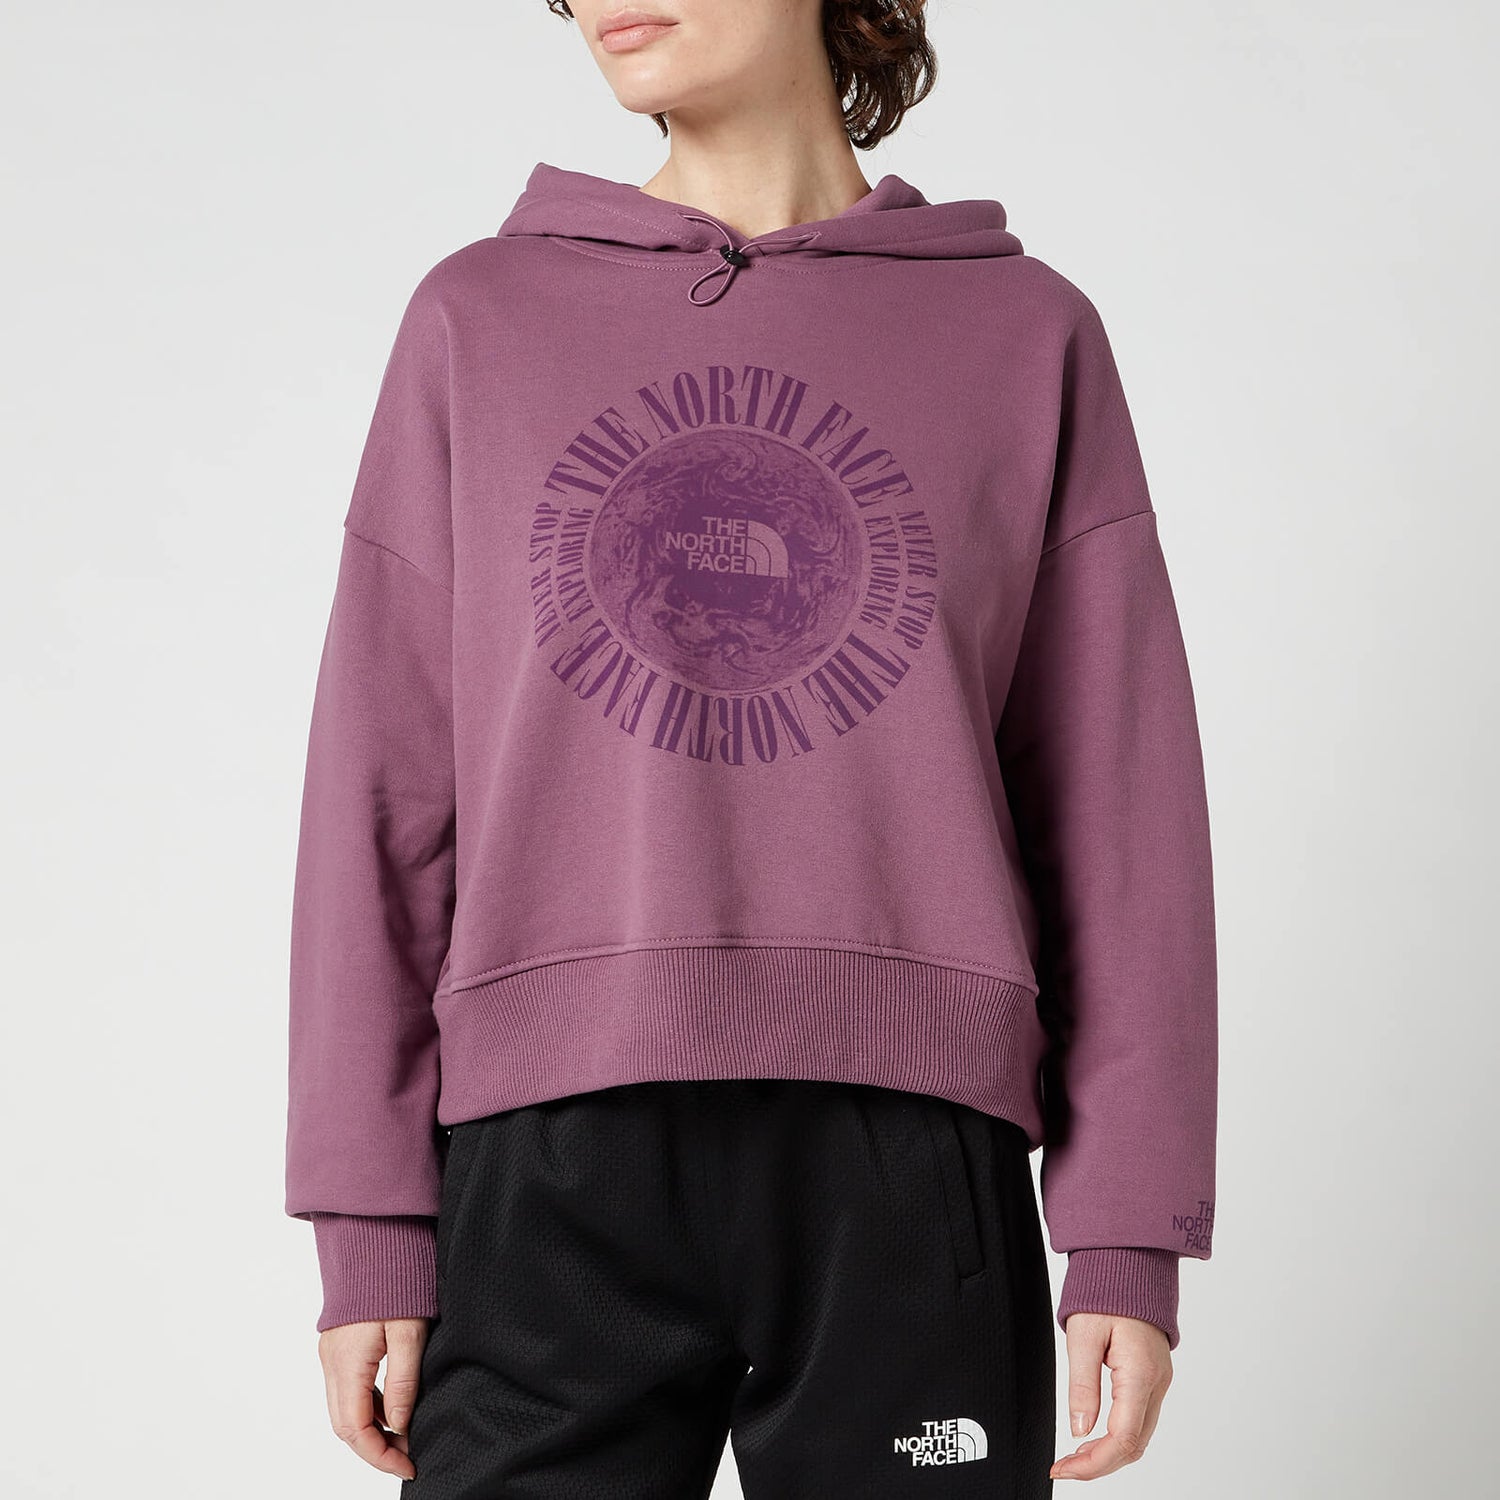 The North Face Women's Recycled Expedition Graphic Hoodie - Purple - M